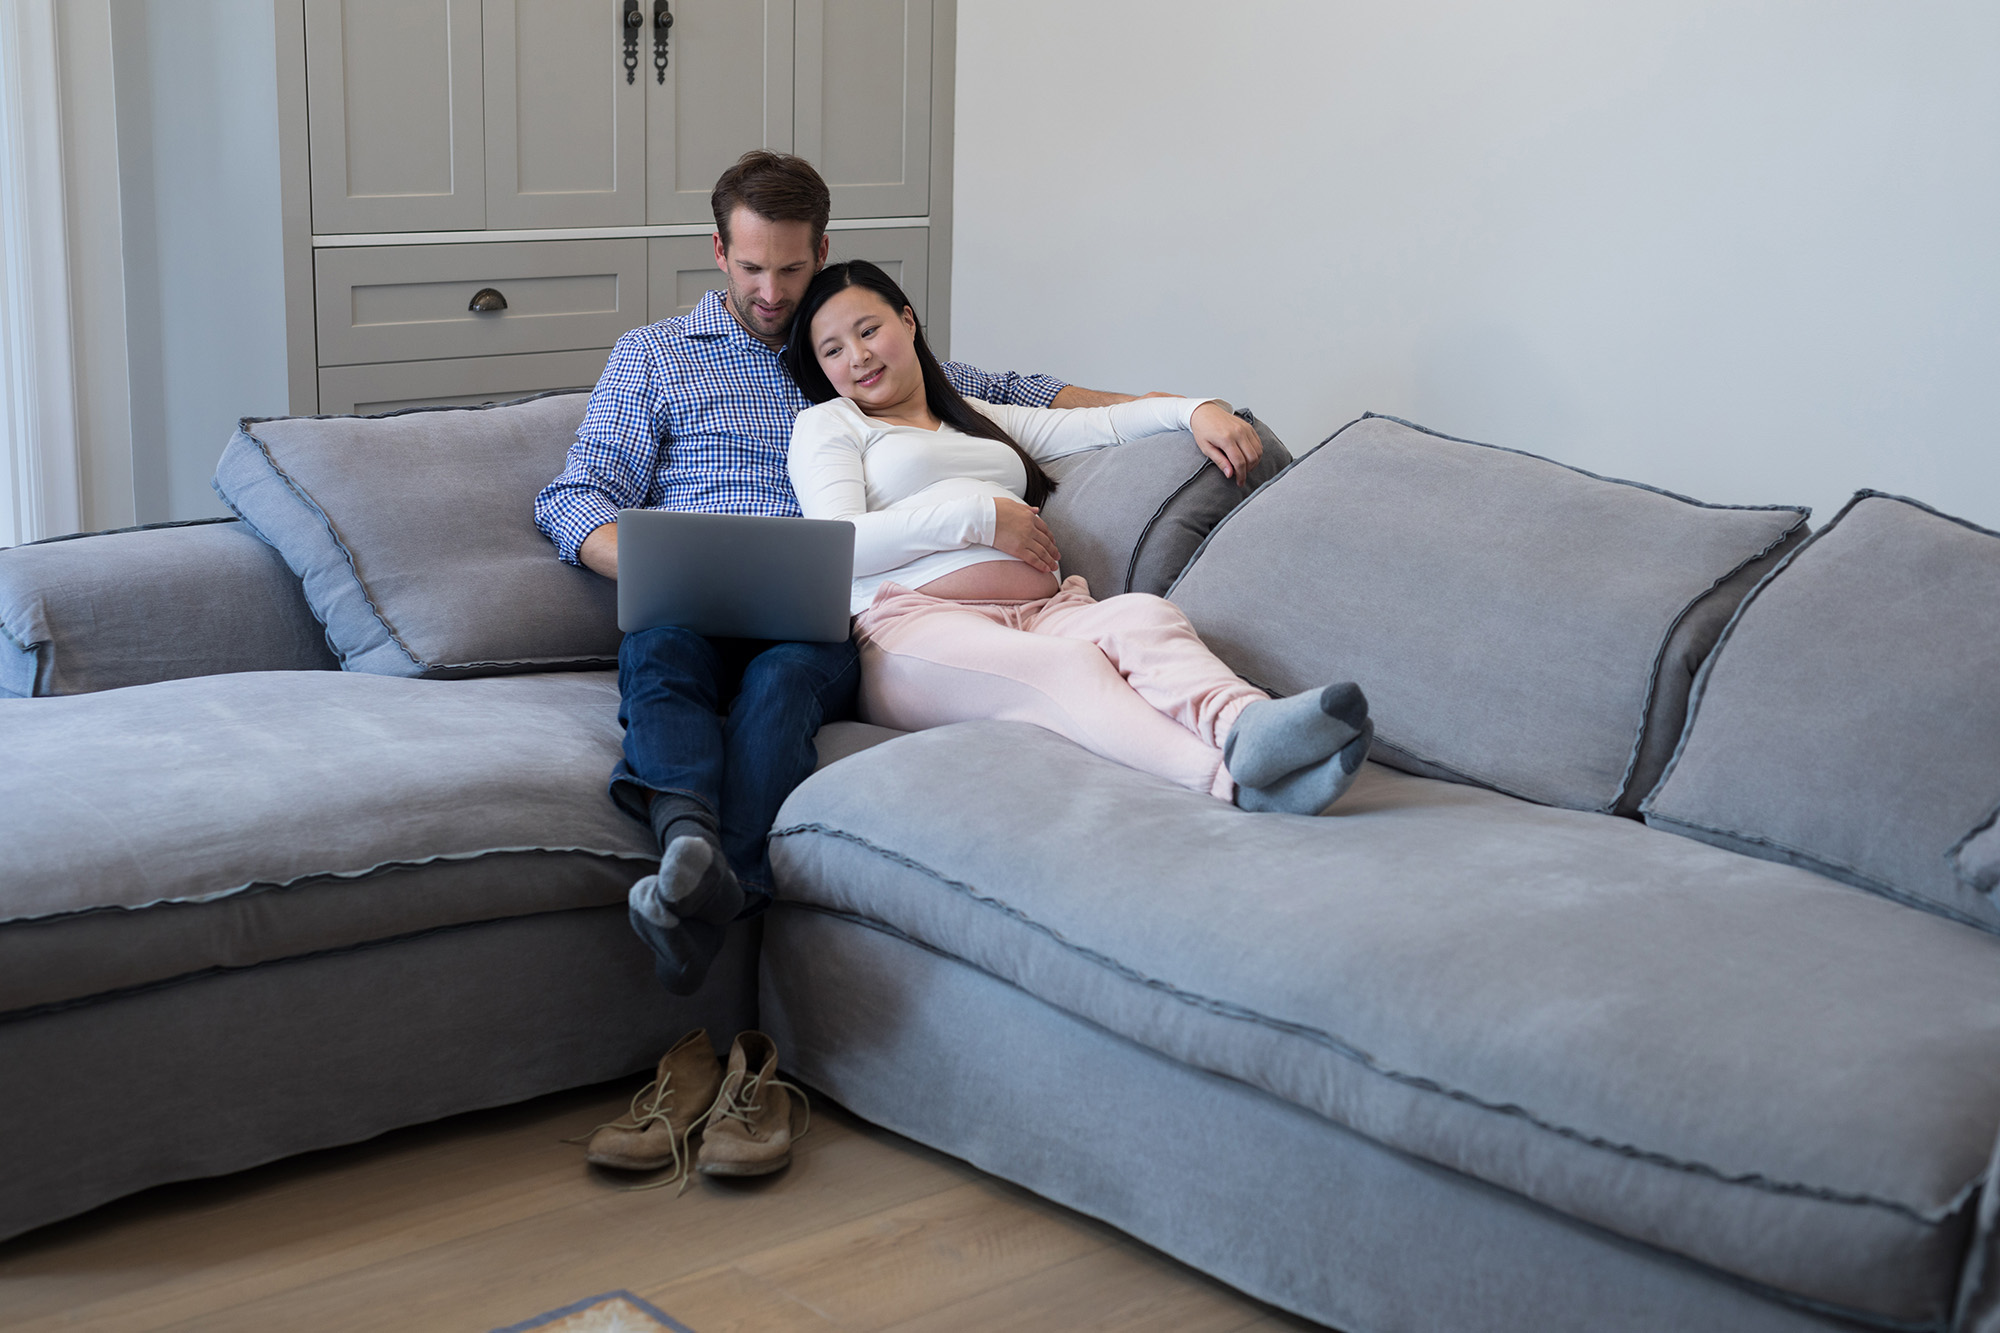 Heterosexual couple watching something on a tablet while smiling. They are sitting on a couch and he's hugging her from behind.